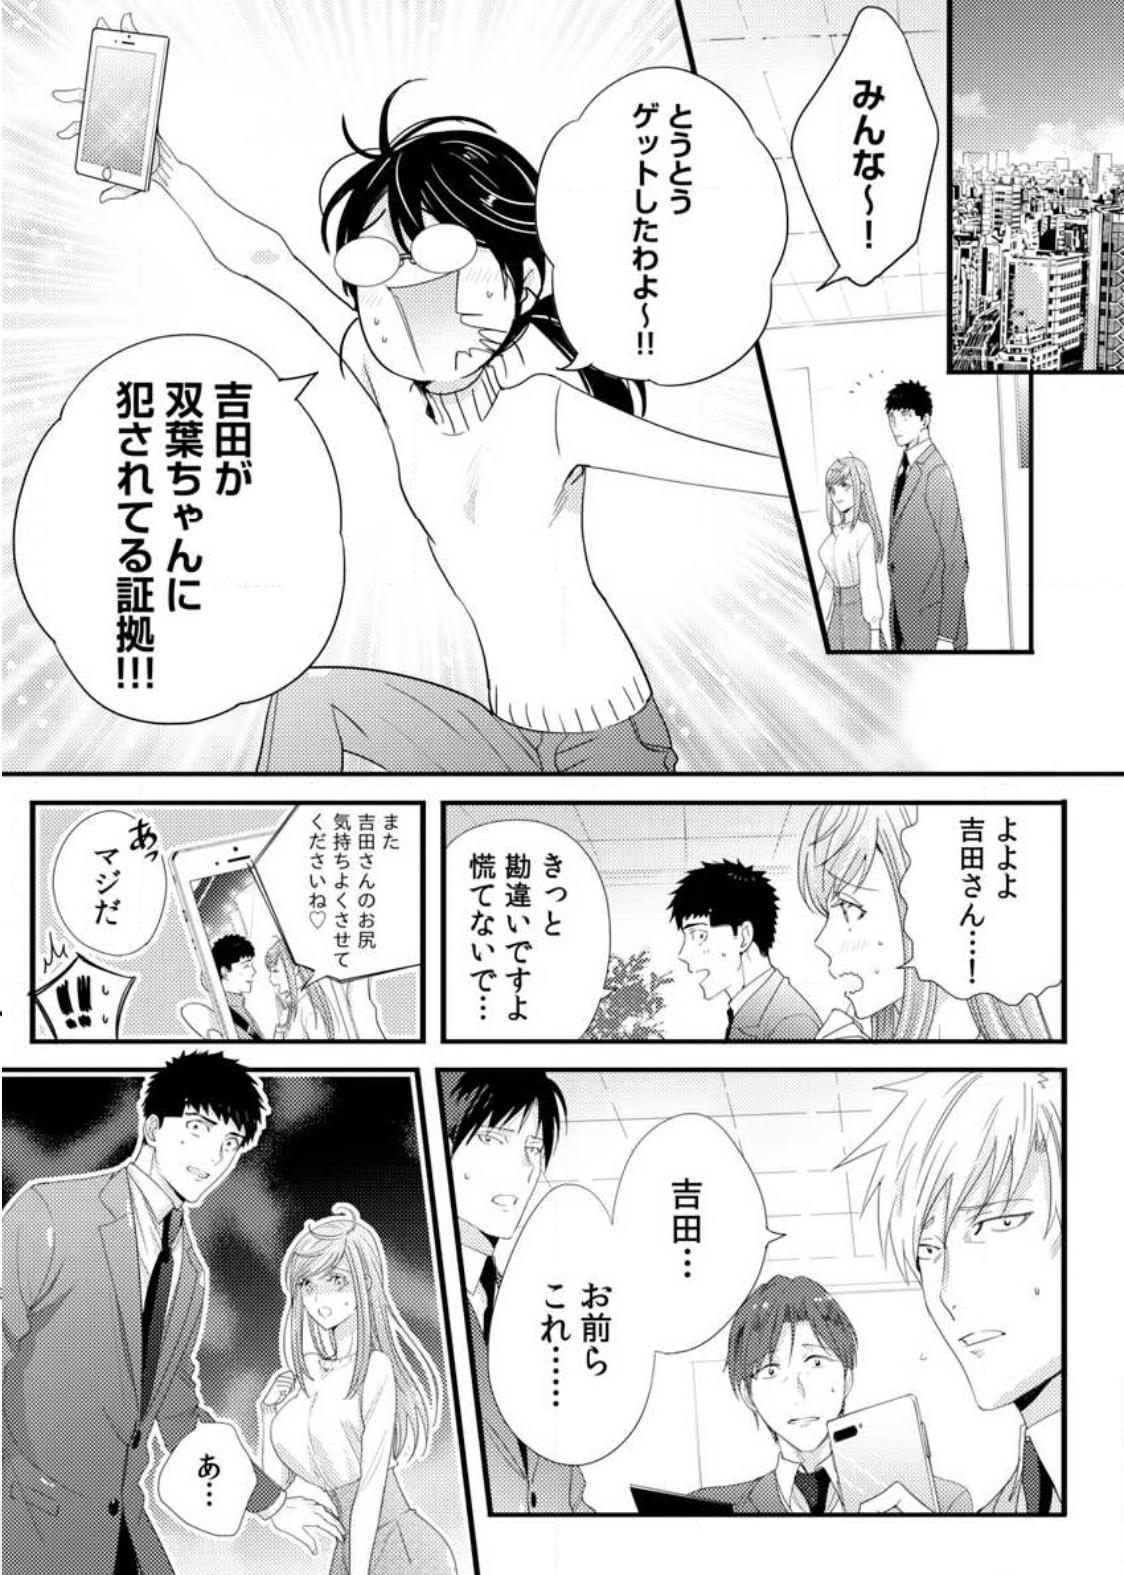 Please Let Me Hold You Futaba-San! Ch. 1-4 100